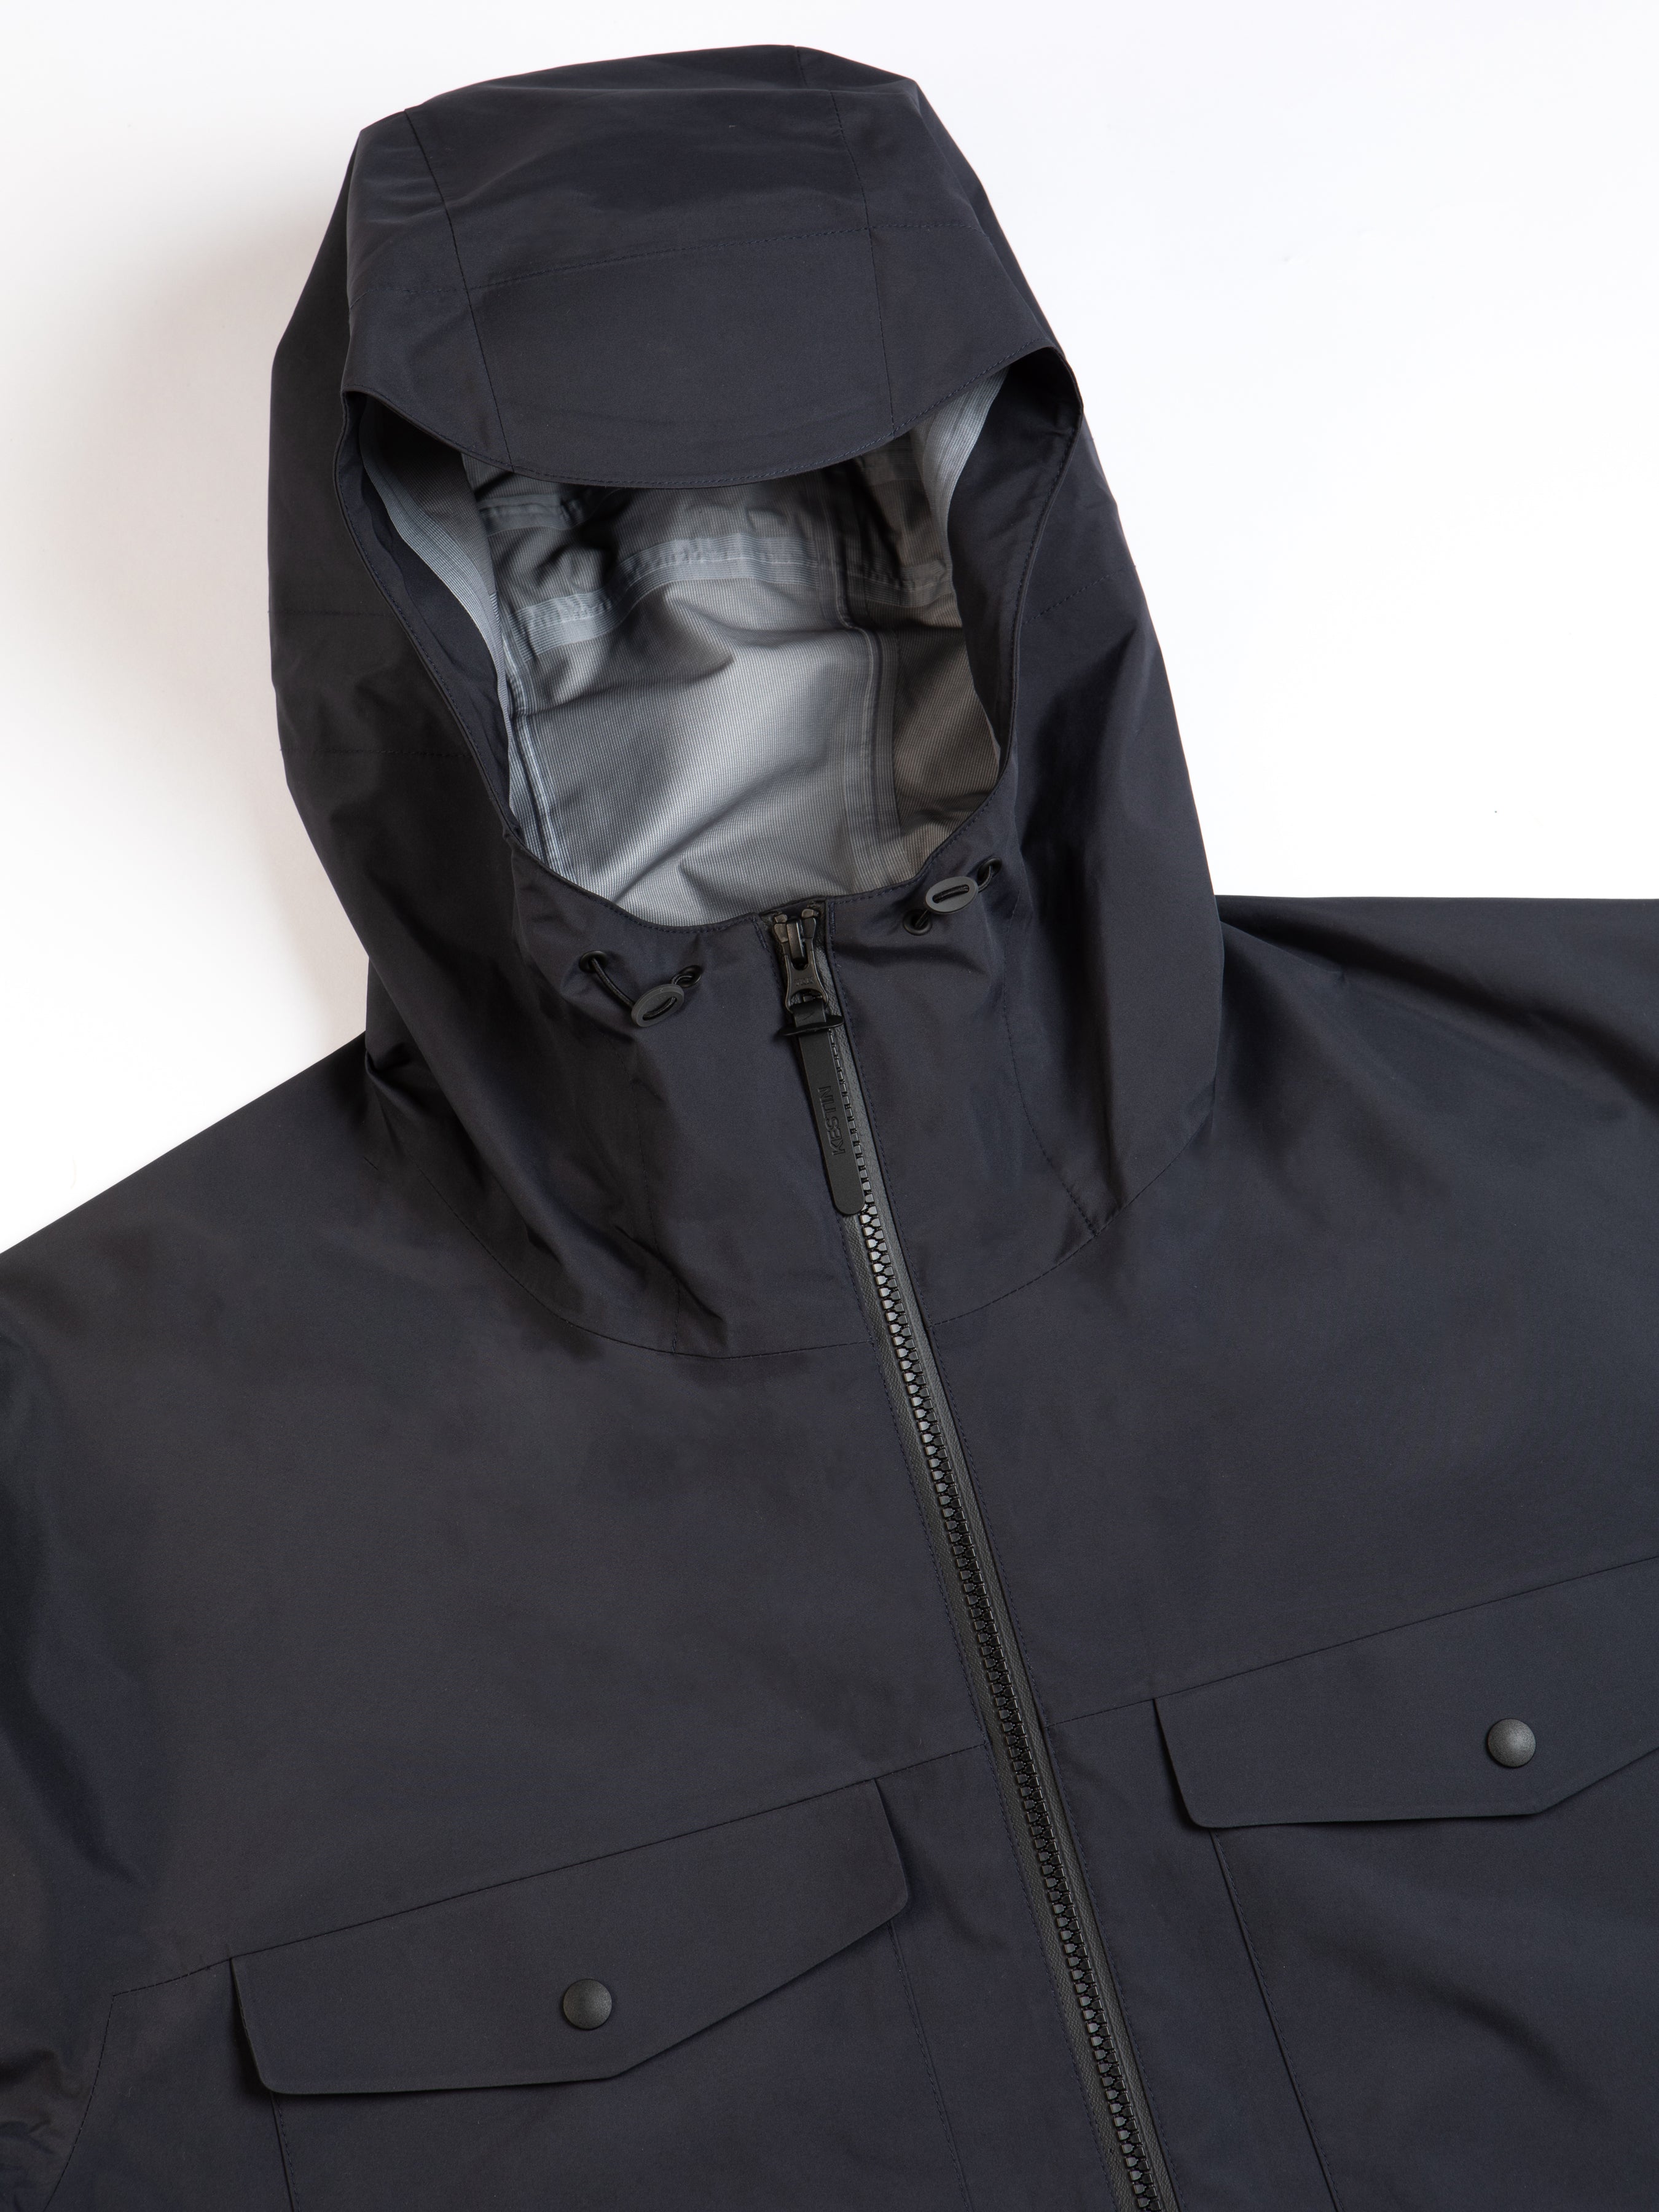 The hood of a technical waterproof shell jacket on a white background.